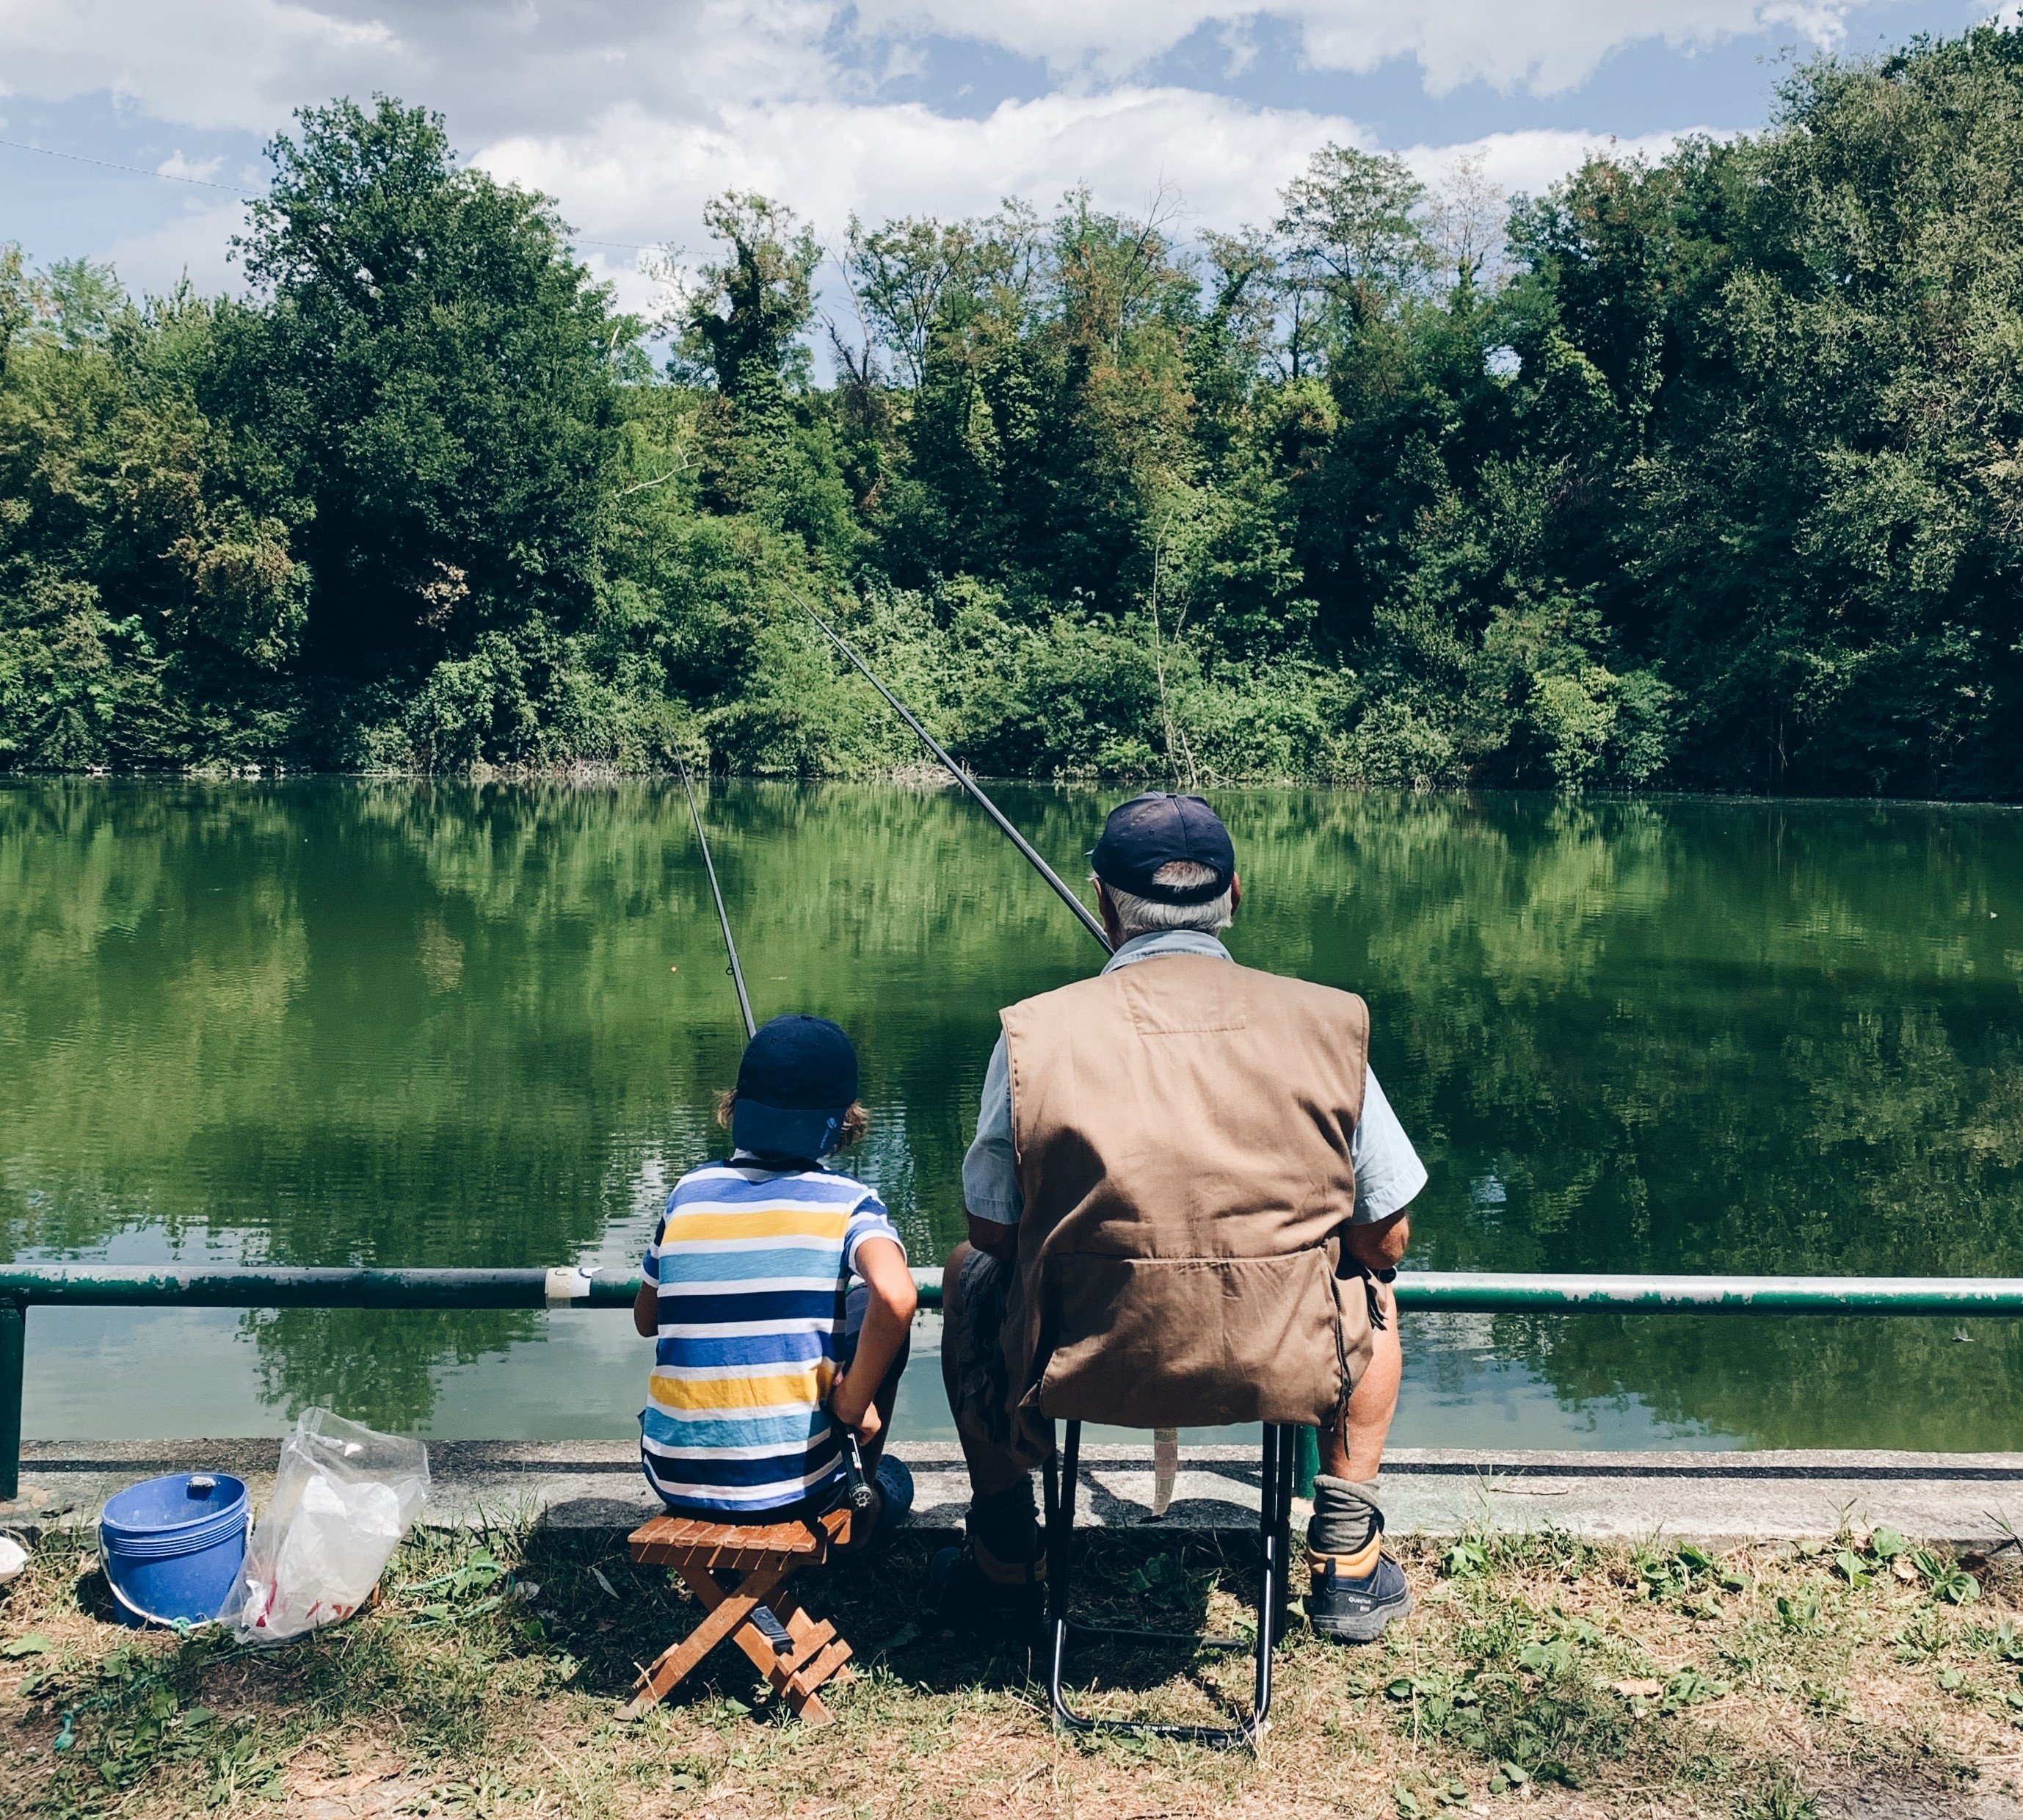 Tim and Jared shared a passion for fishing. | Source: Unsplash